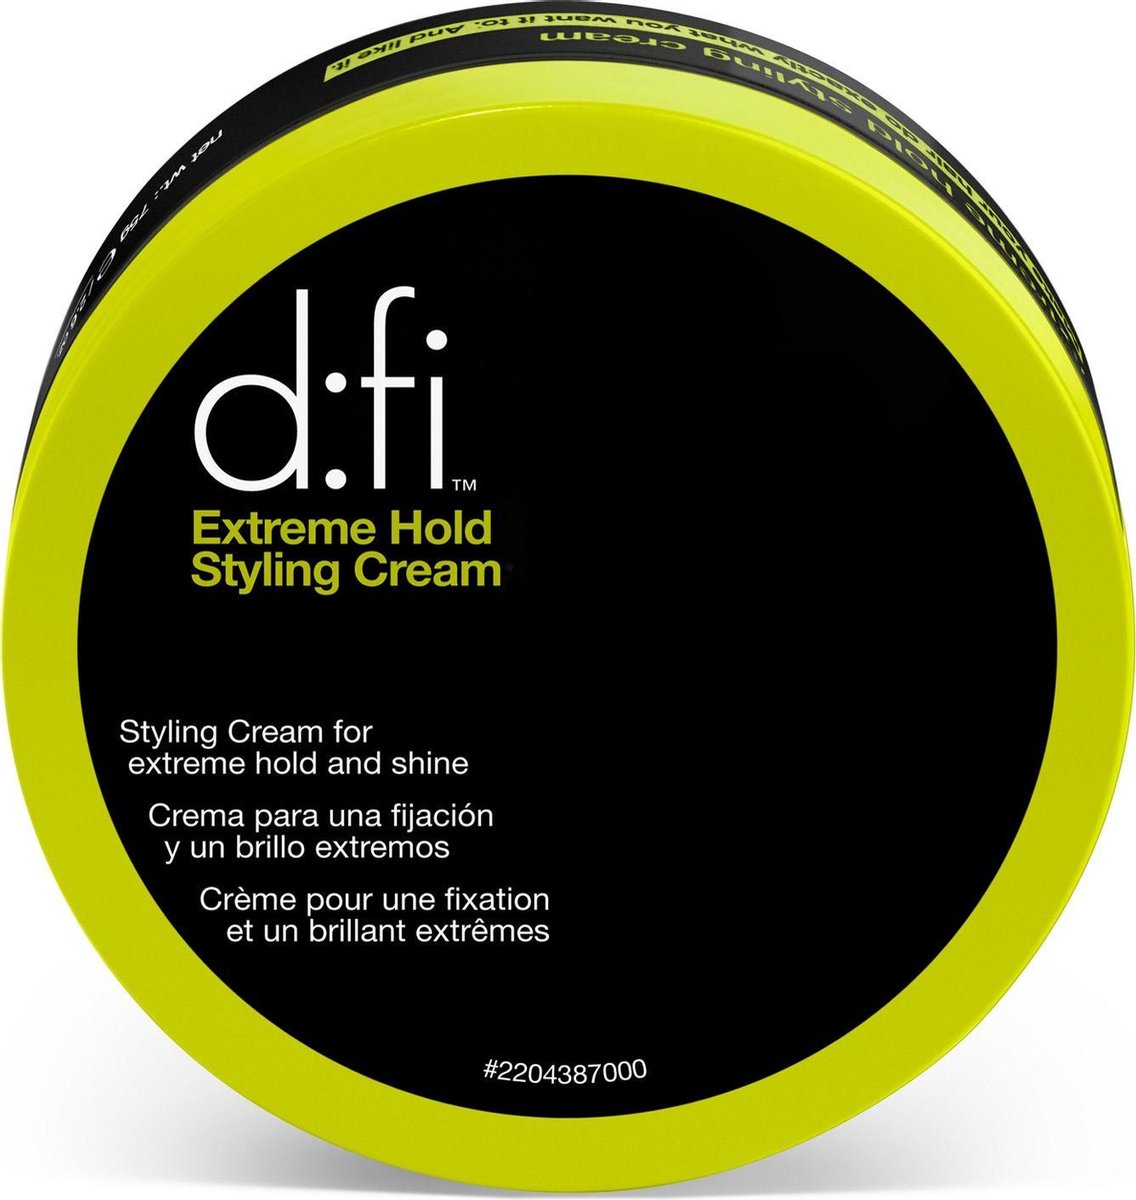 D:fi - Extreme Hold Styling Cream